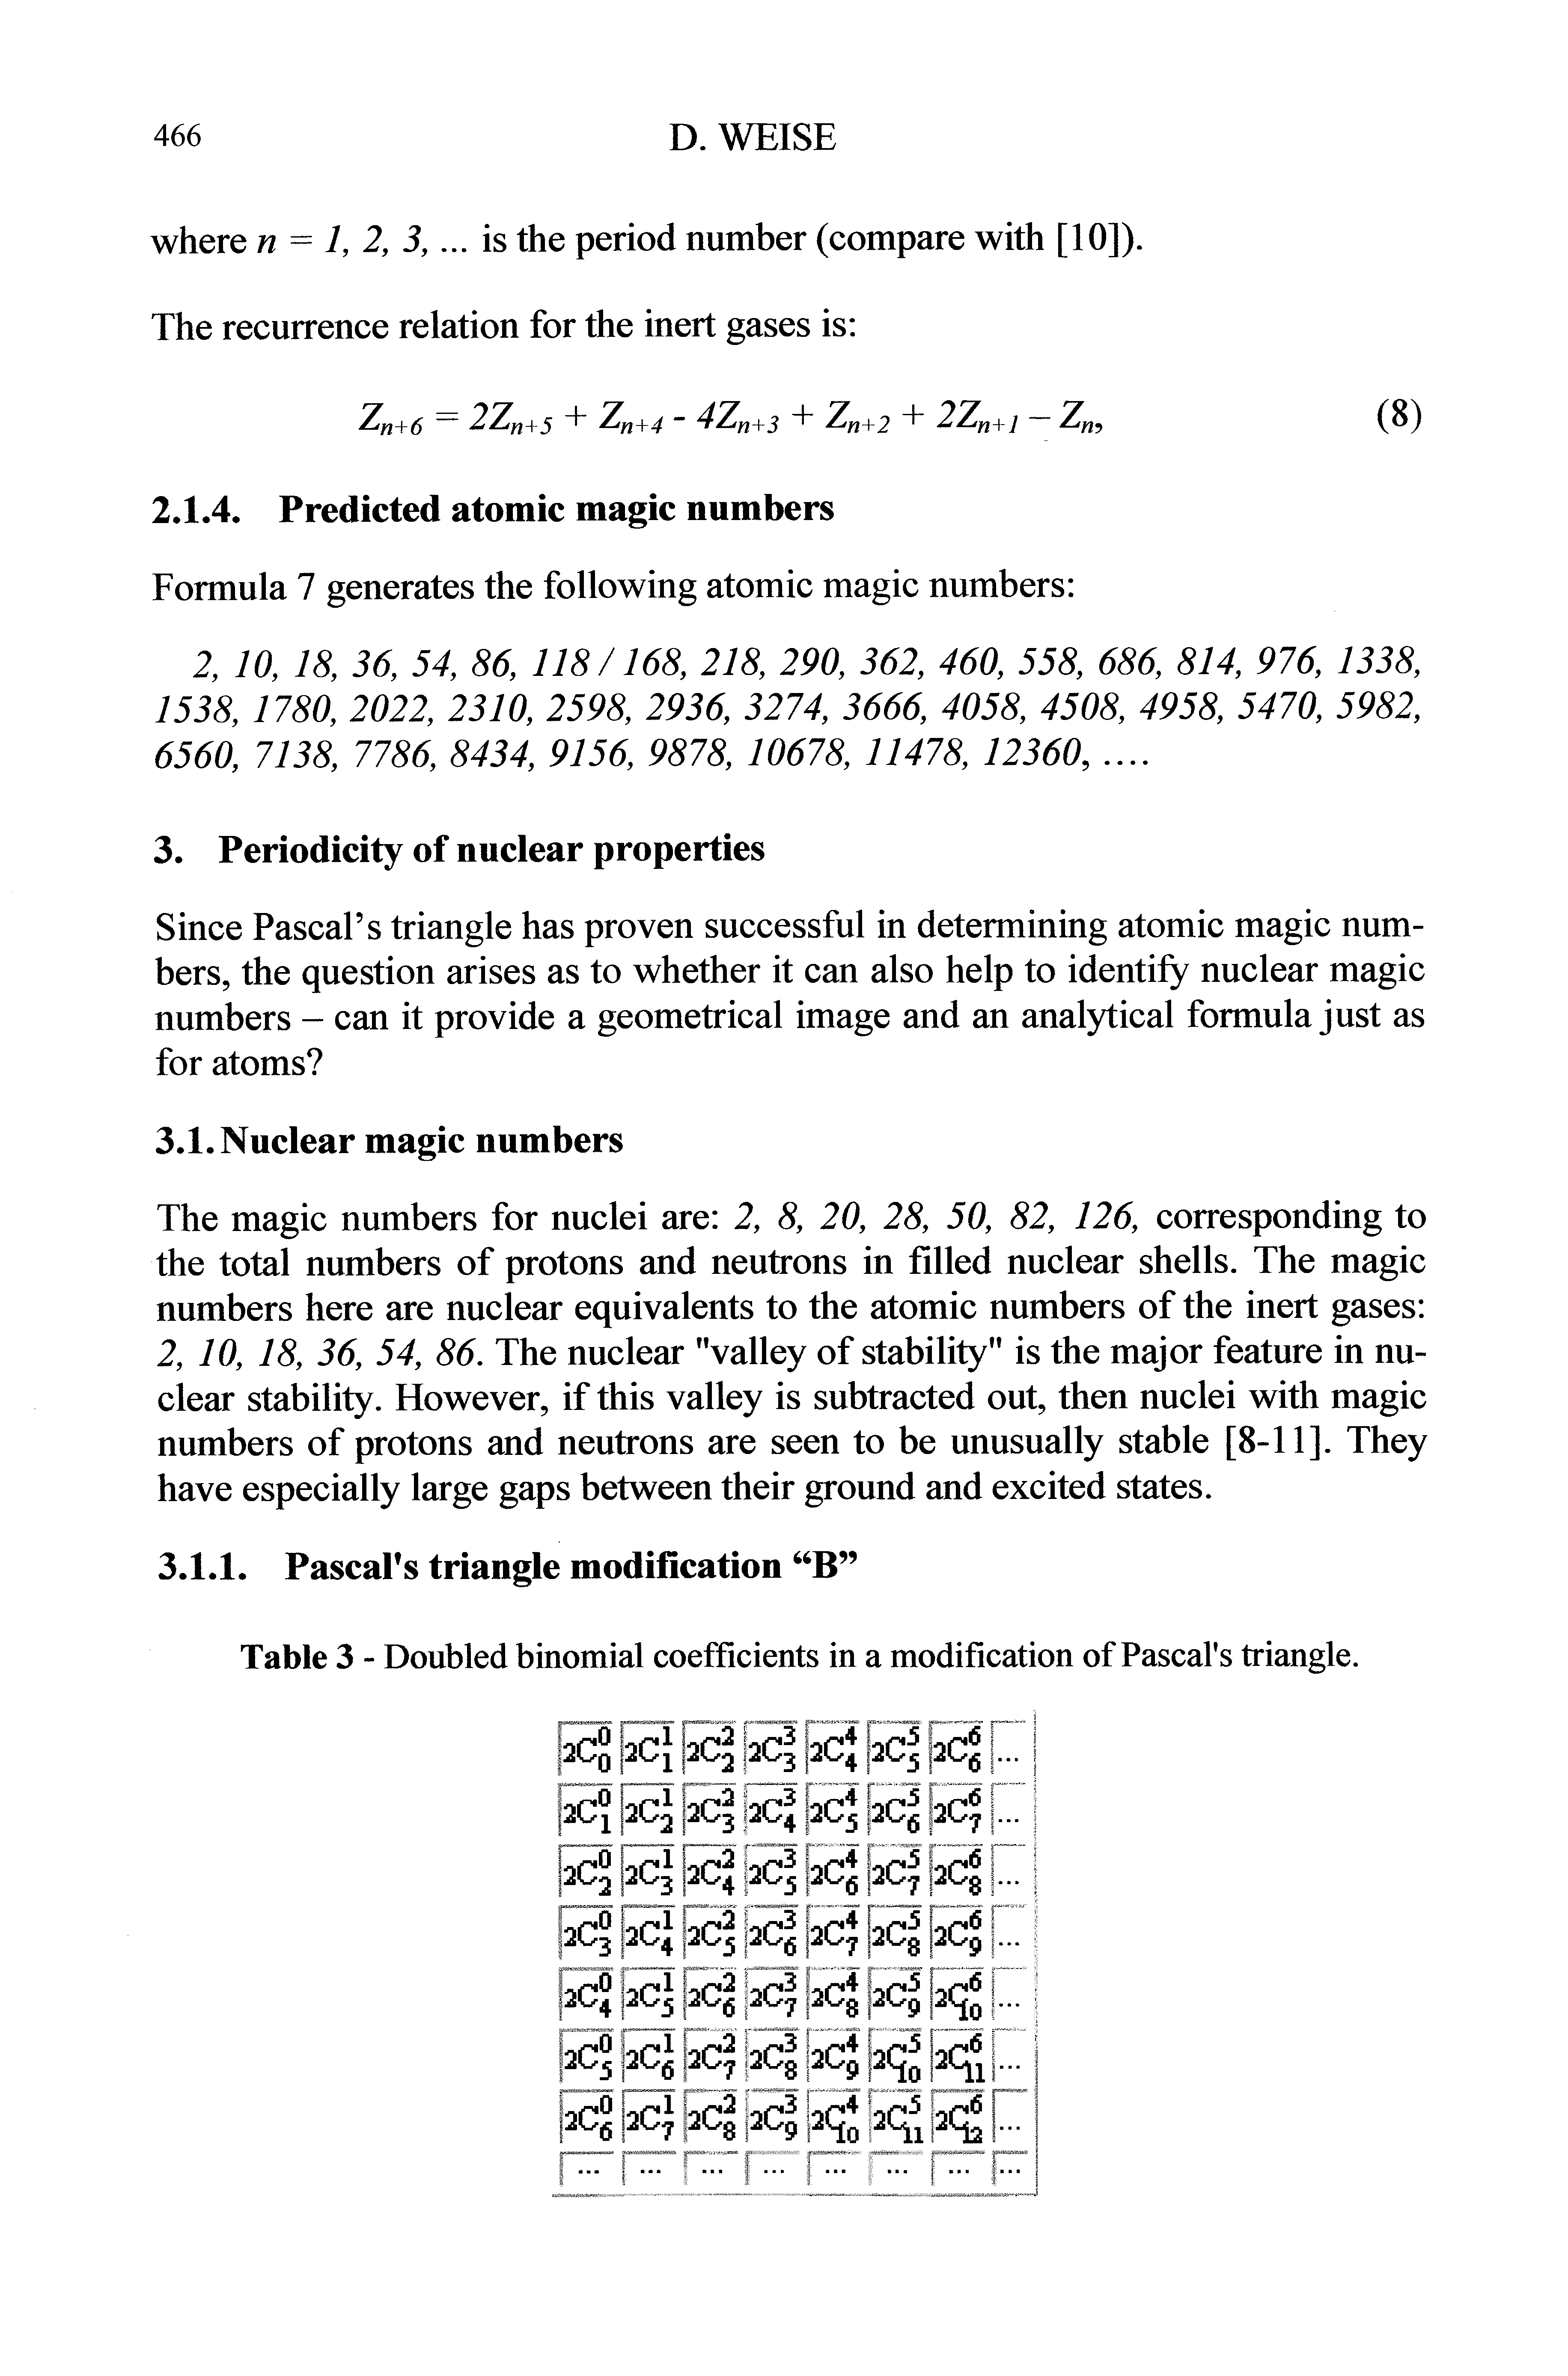 Table 3 - Doubled binomial coefficients in a modification of Pascal s triangle.